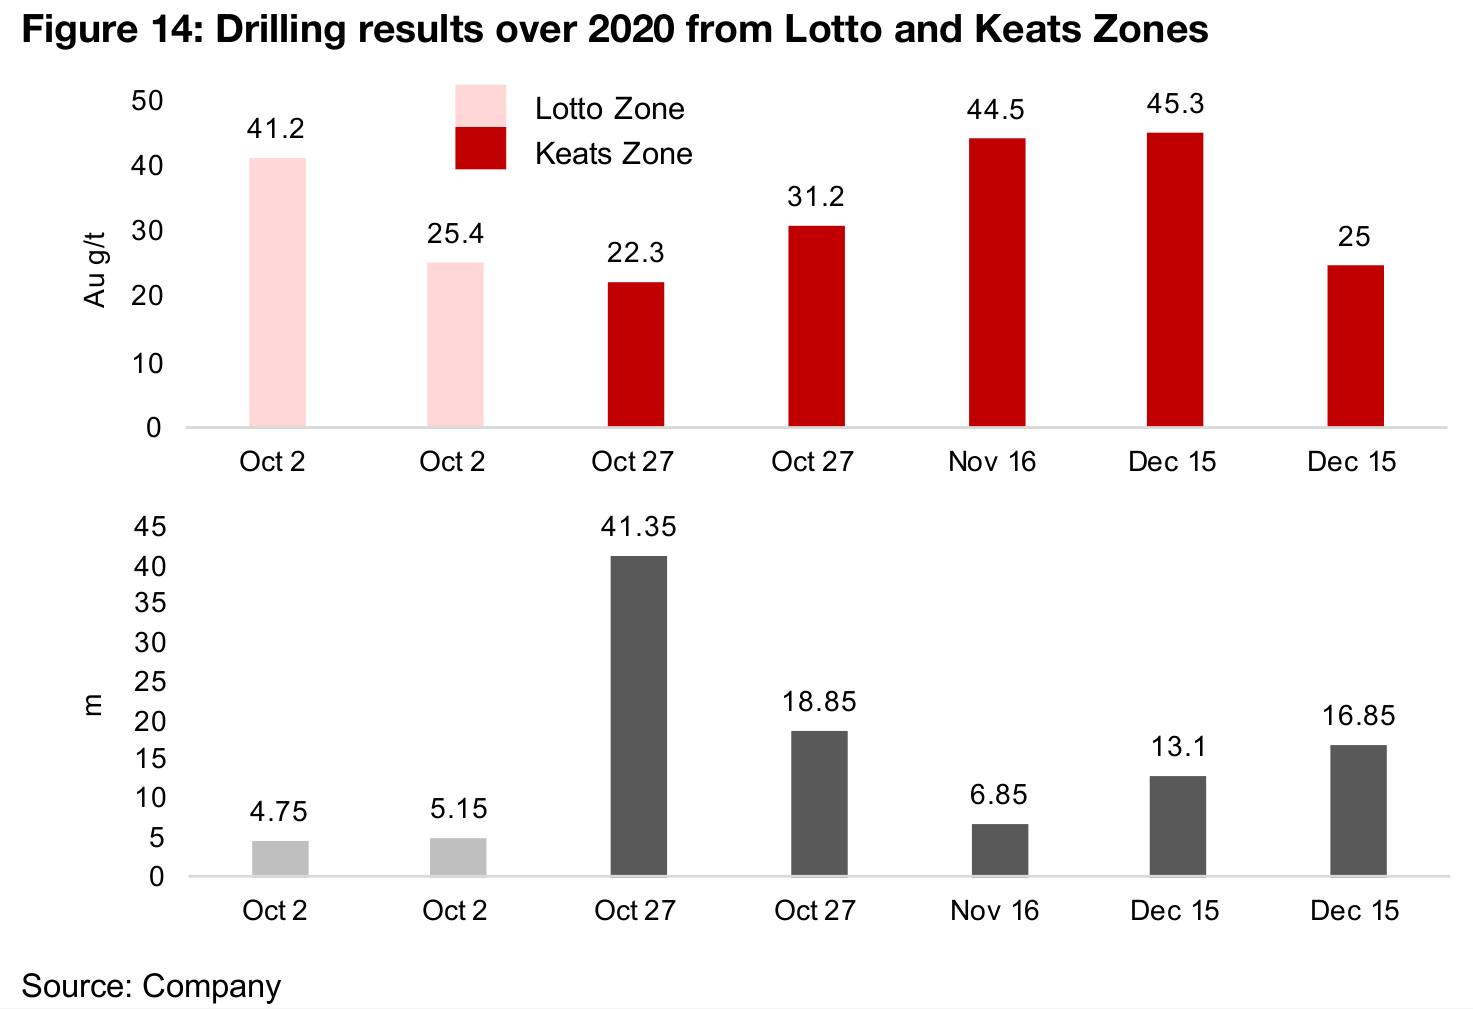 Drilling results focussed on Keats and Lotto in 2020